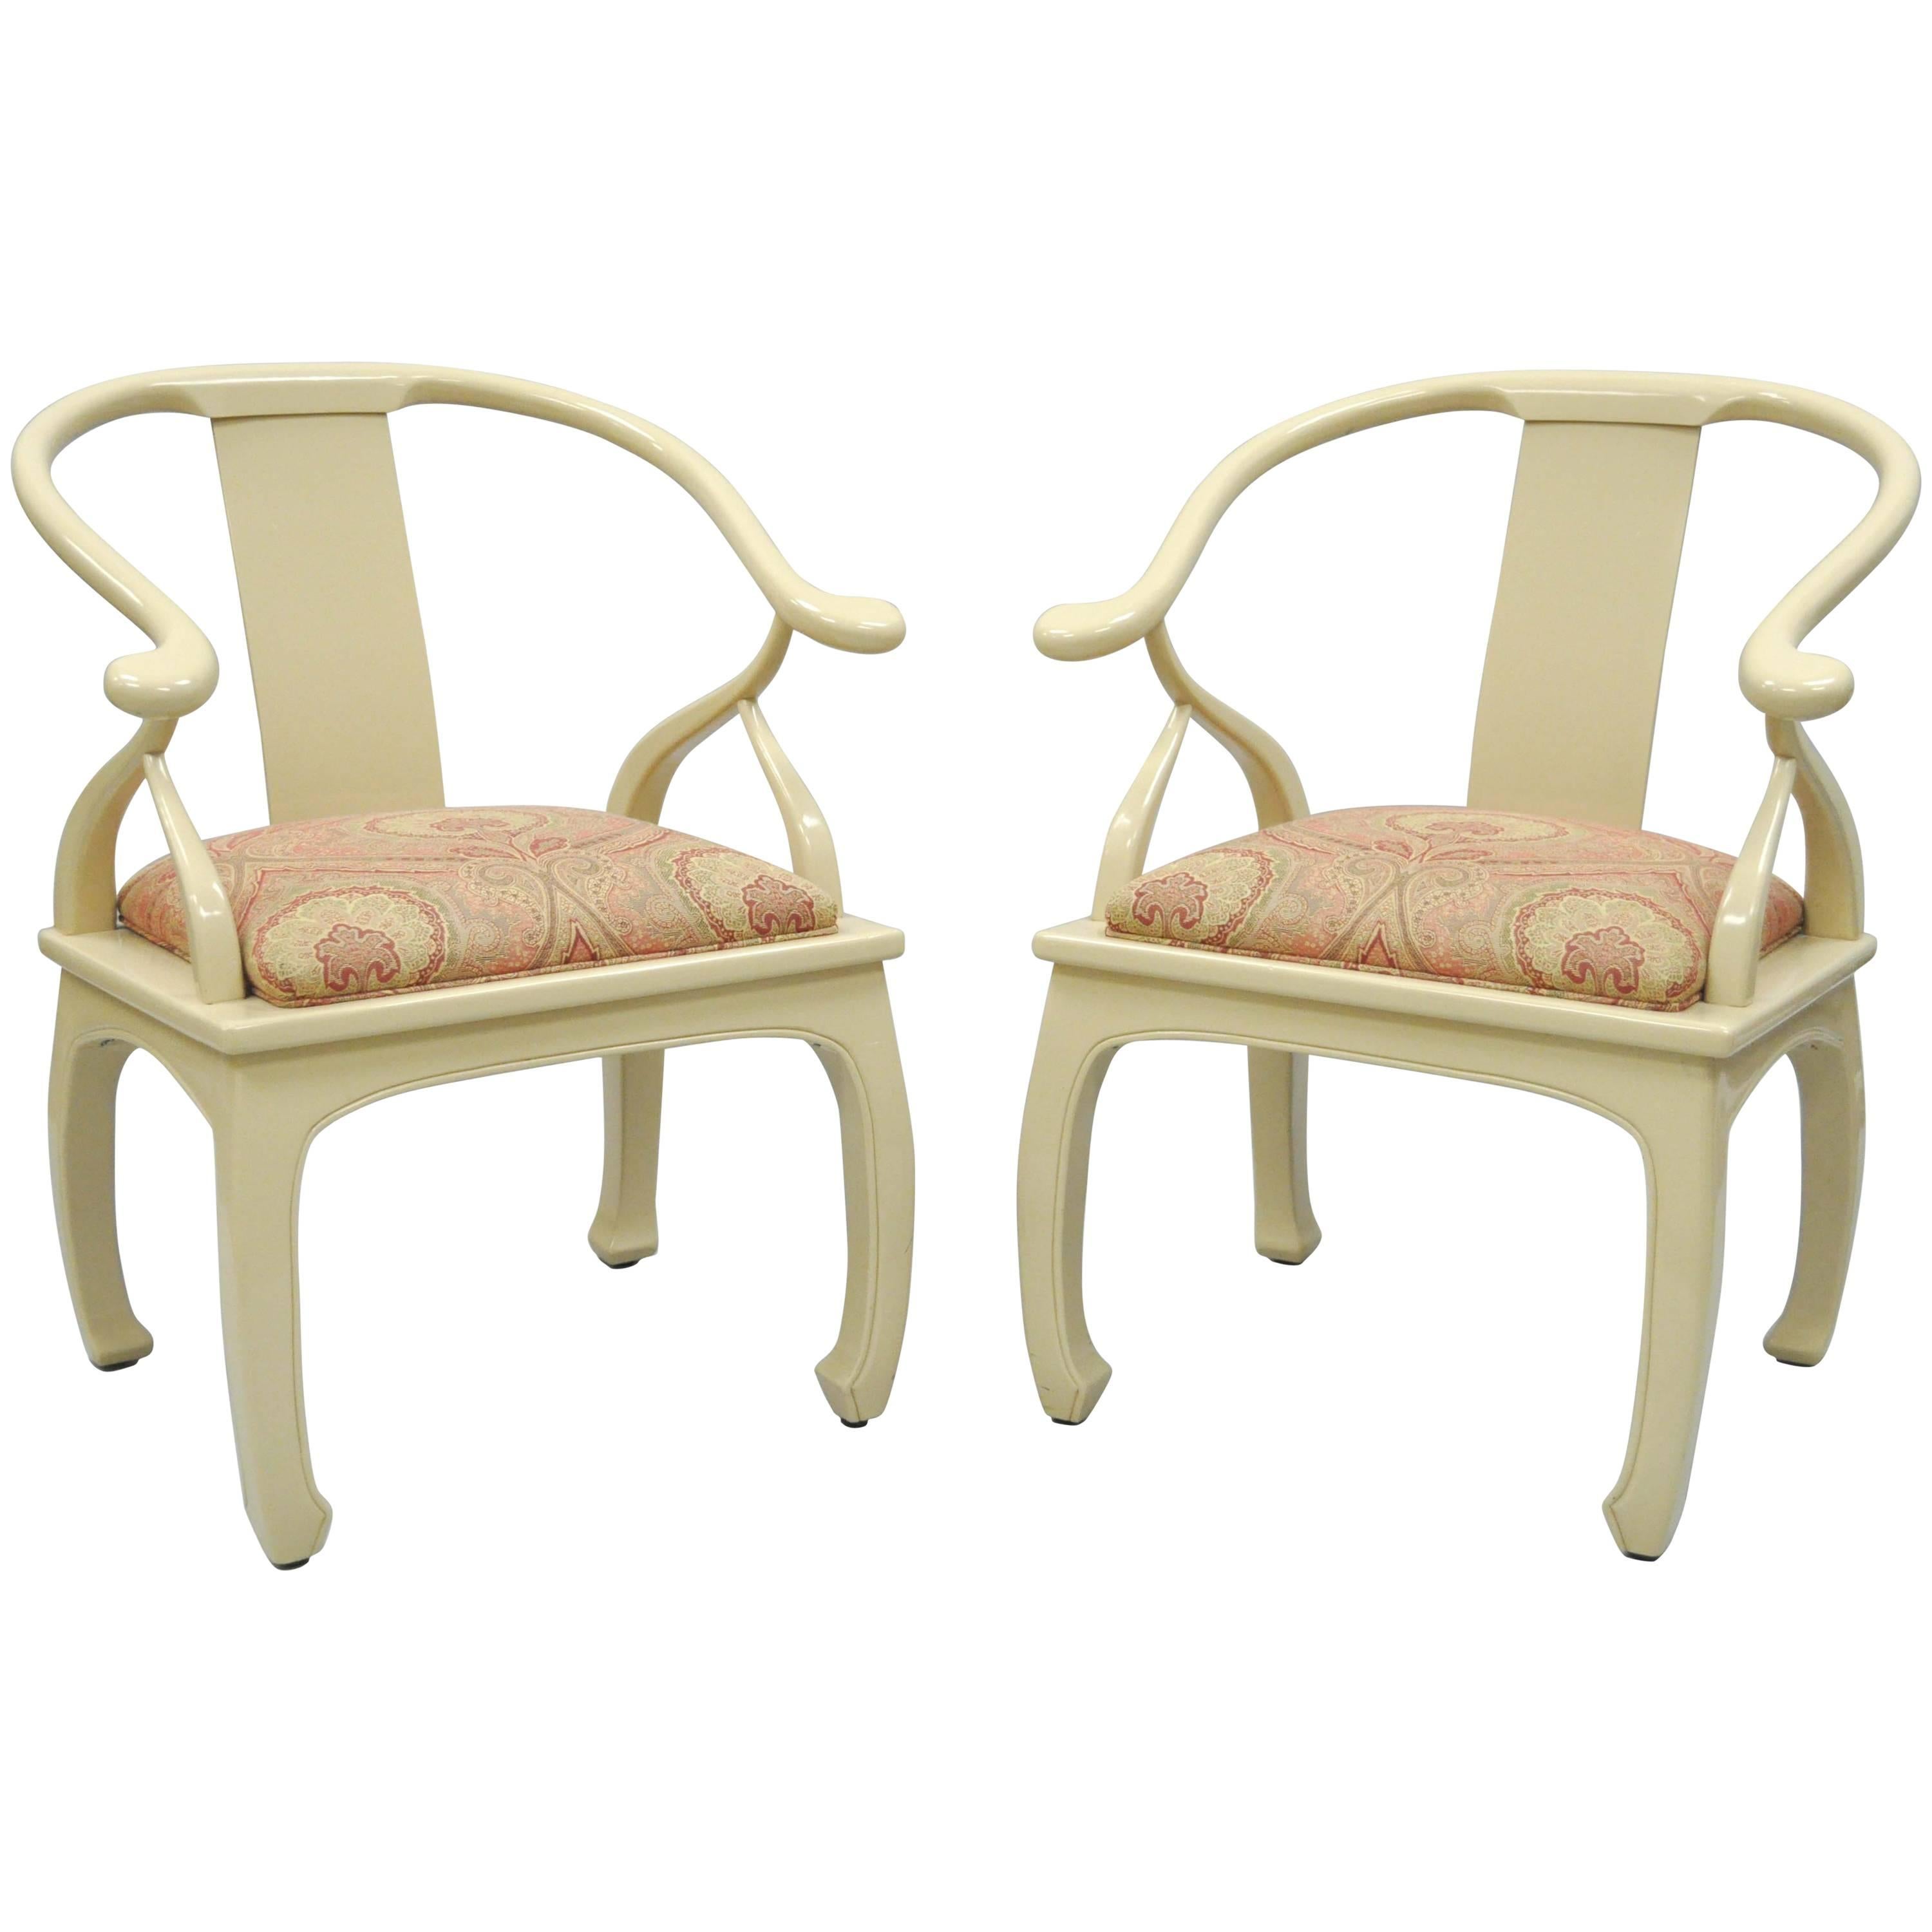 Pair of Vintage Cream Lacquered James Mont Style Ming Horseshoe Lounge Chairs For Sale